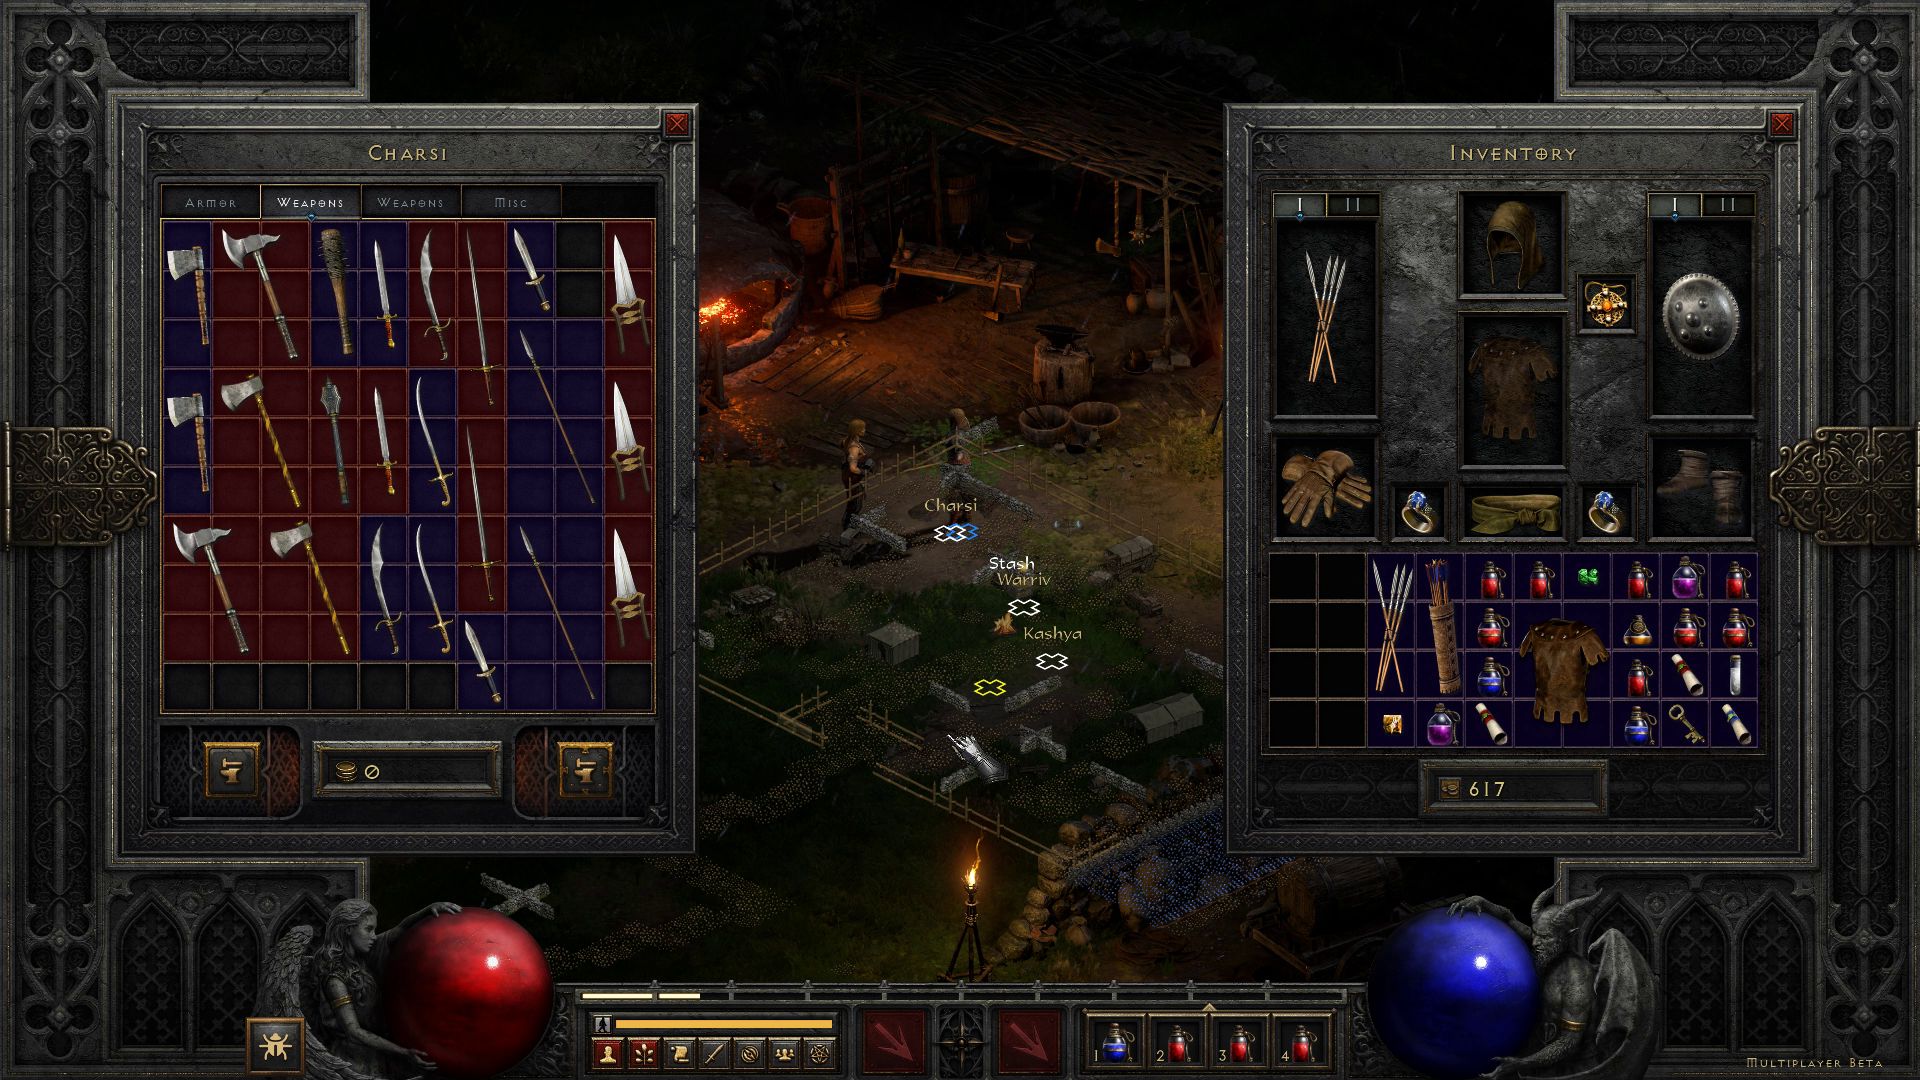 A screenshot from the open beta of Diablo II: Resurrected showing the very small inventory next to an NPCs shop inventory. Both are full of weapons taking up a lot of space